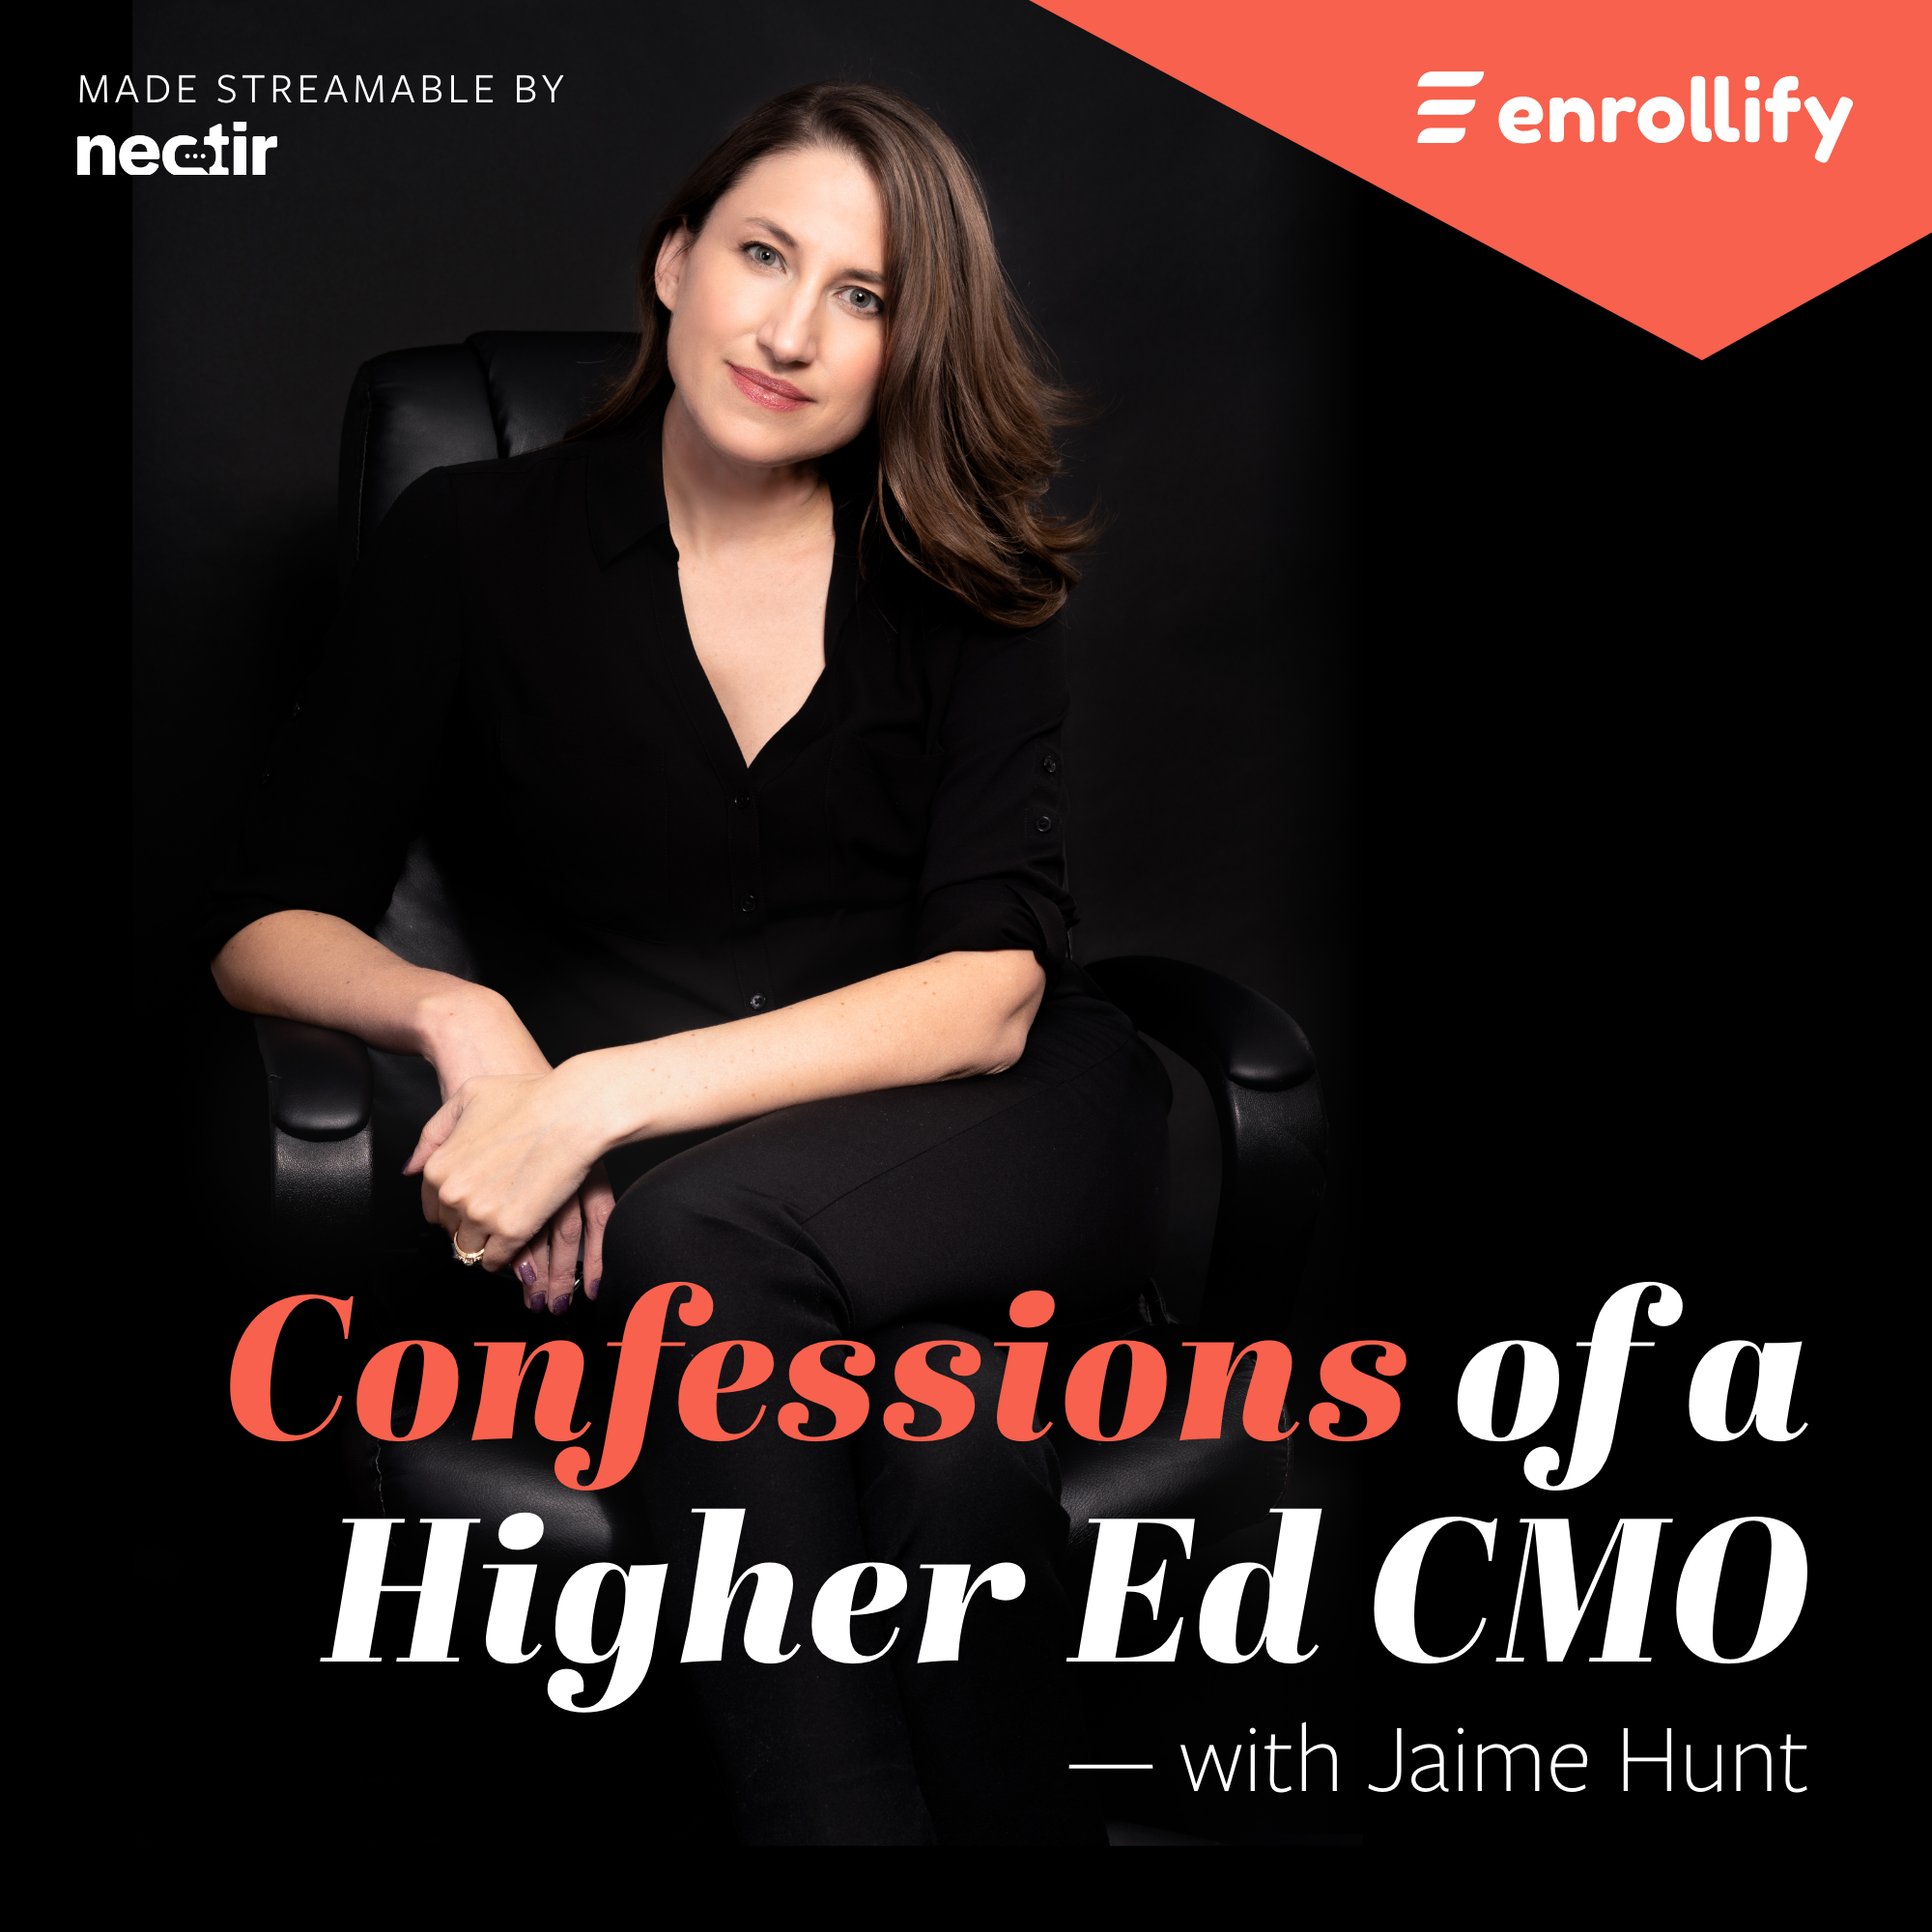 Confessions of a Higher Ed CMO Logo